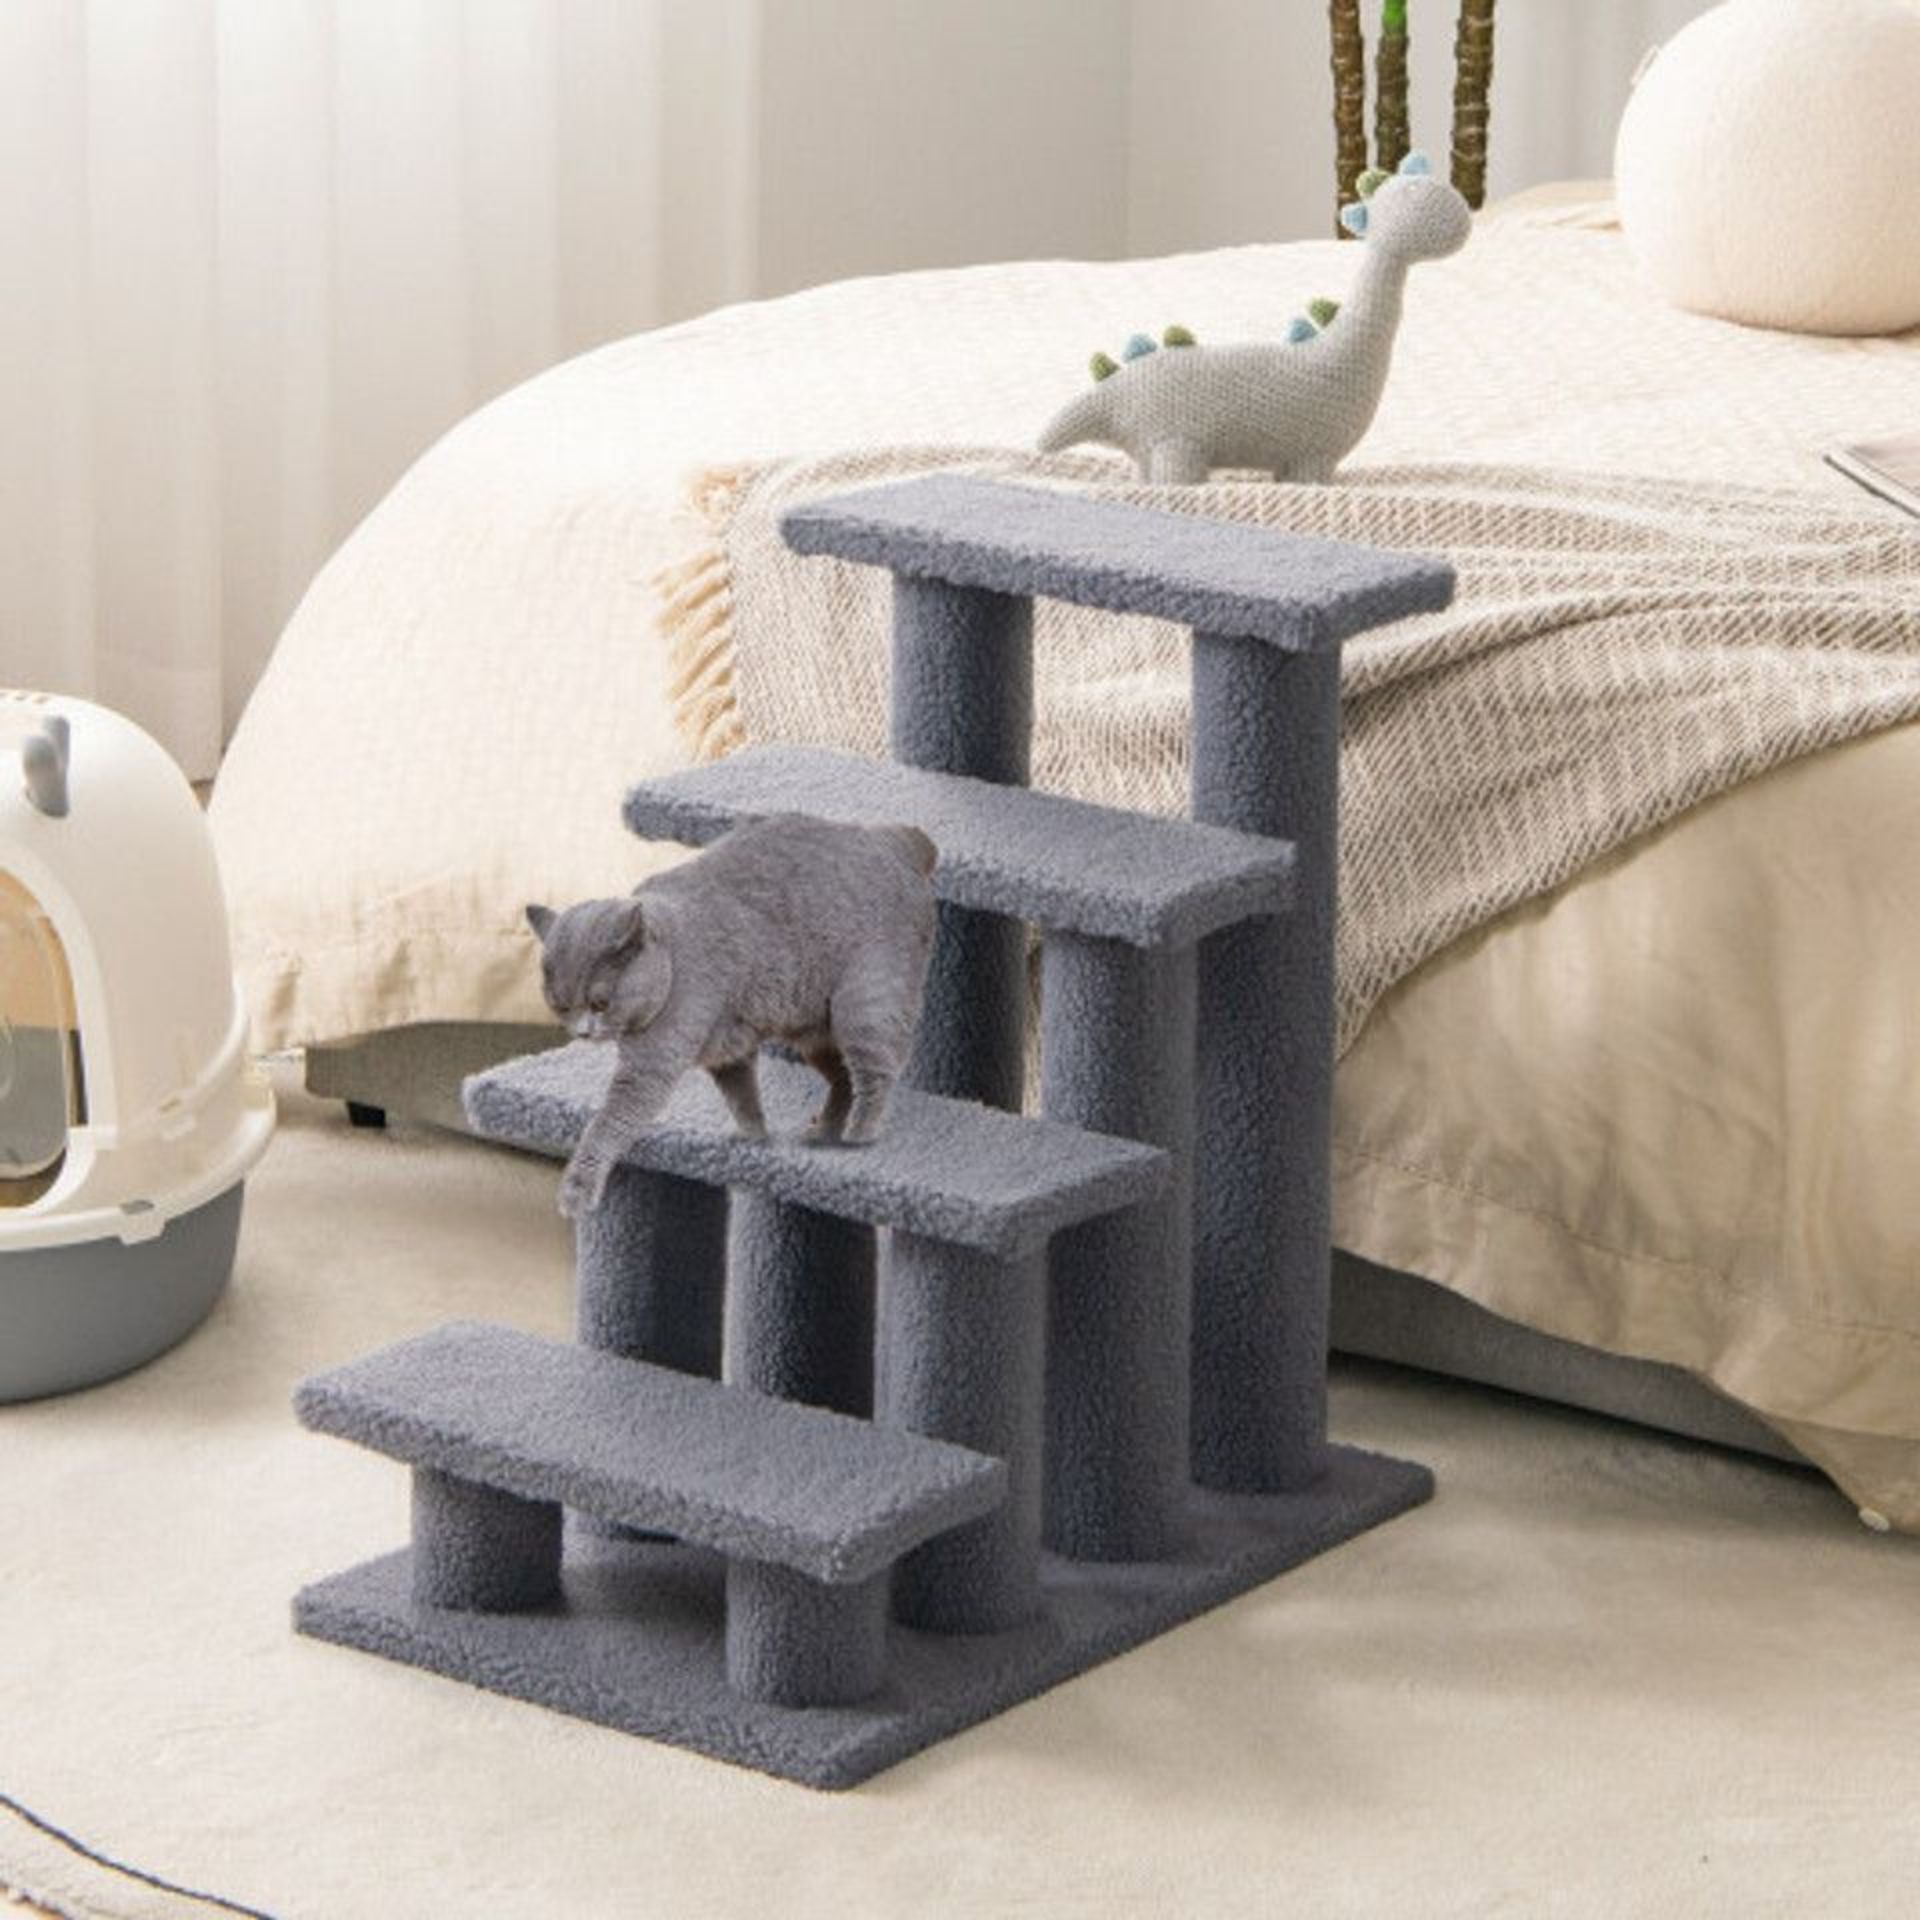 24 Inch 4-Step Pet Stairs Carpeted Ladder Ramp Scratching Post Cat Tree Climber. -ER53. This 4 steps